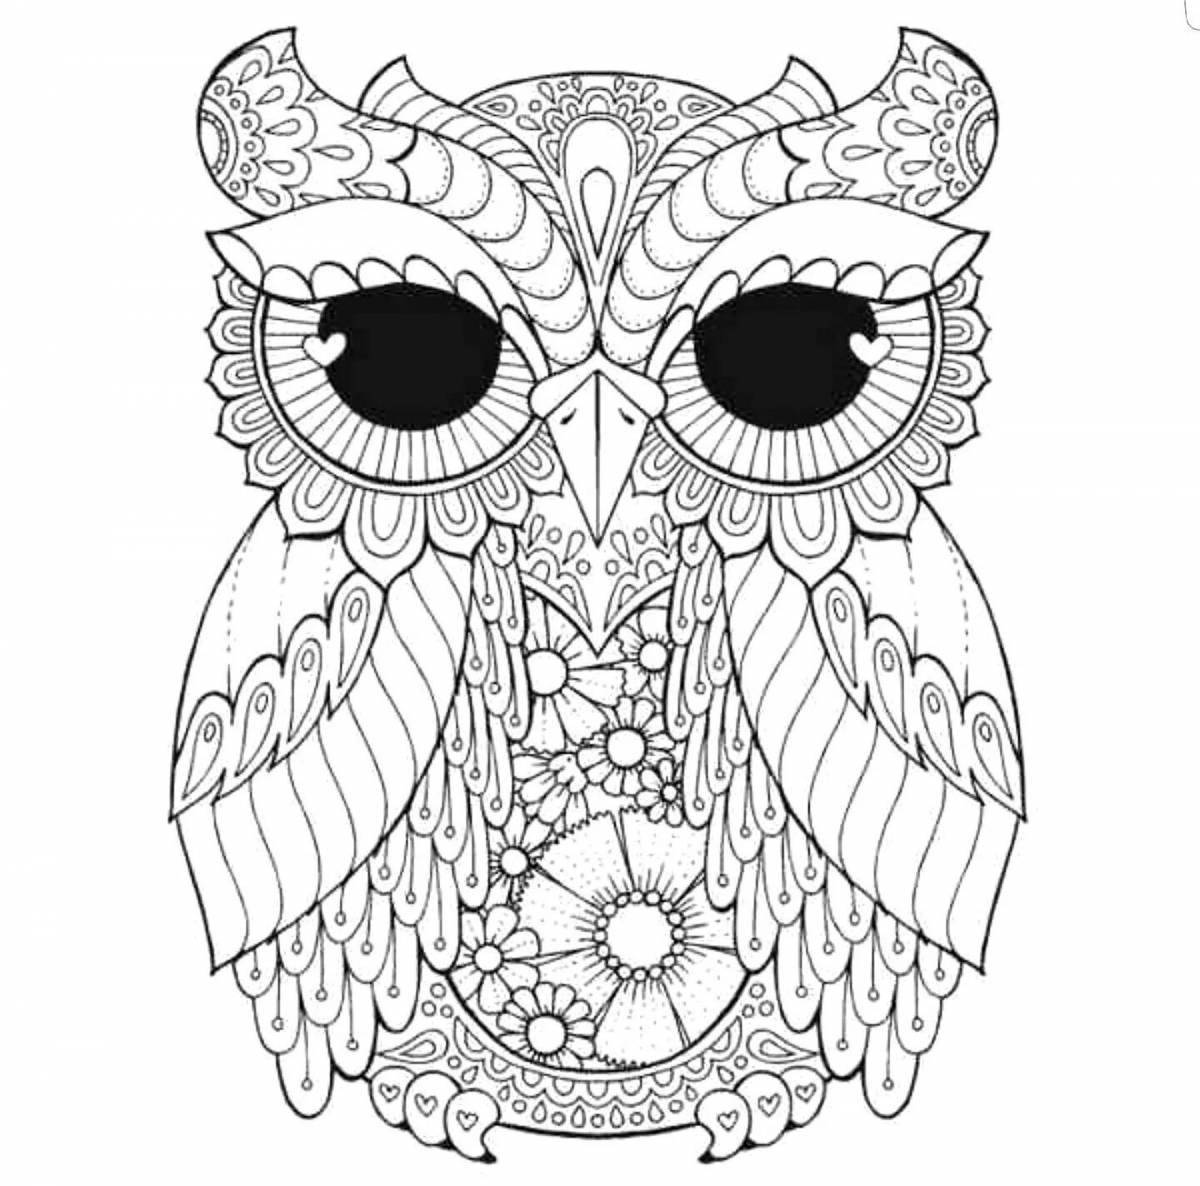 Delightful anti-stress easy coloring pages for girls